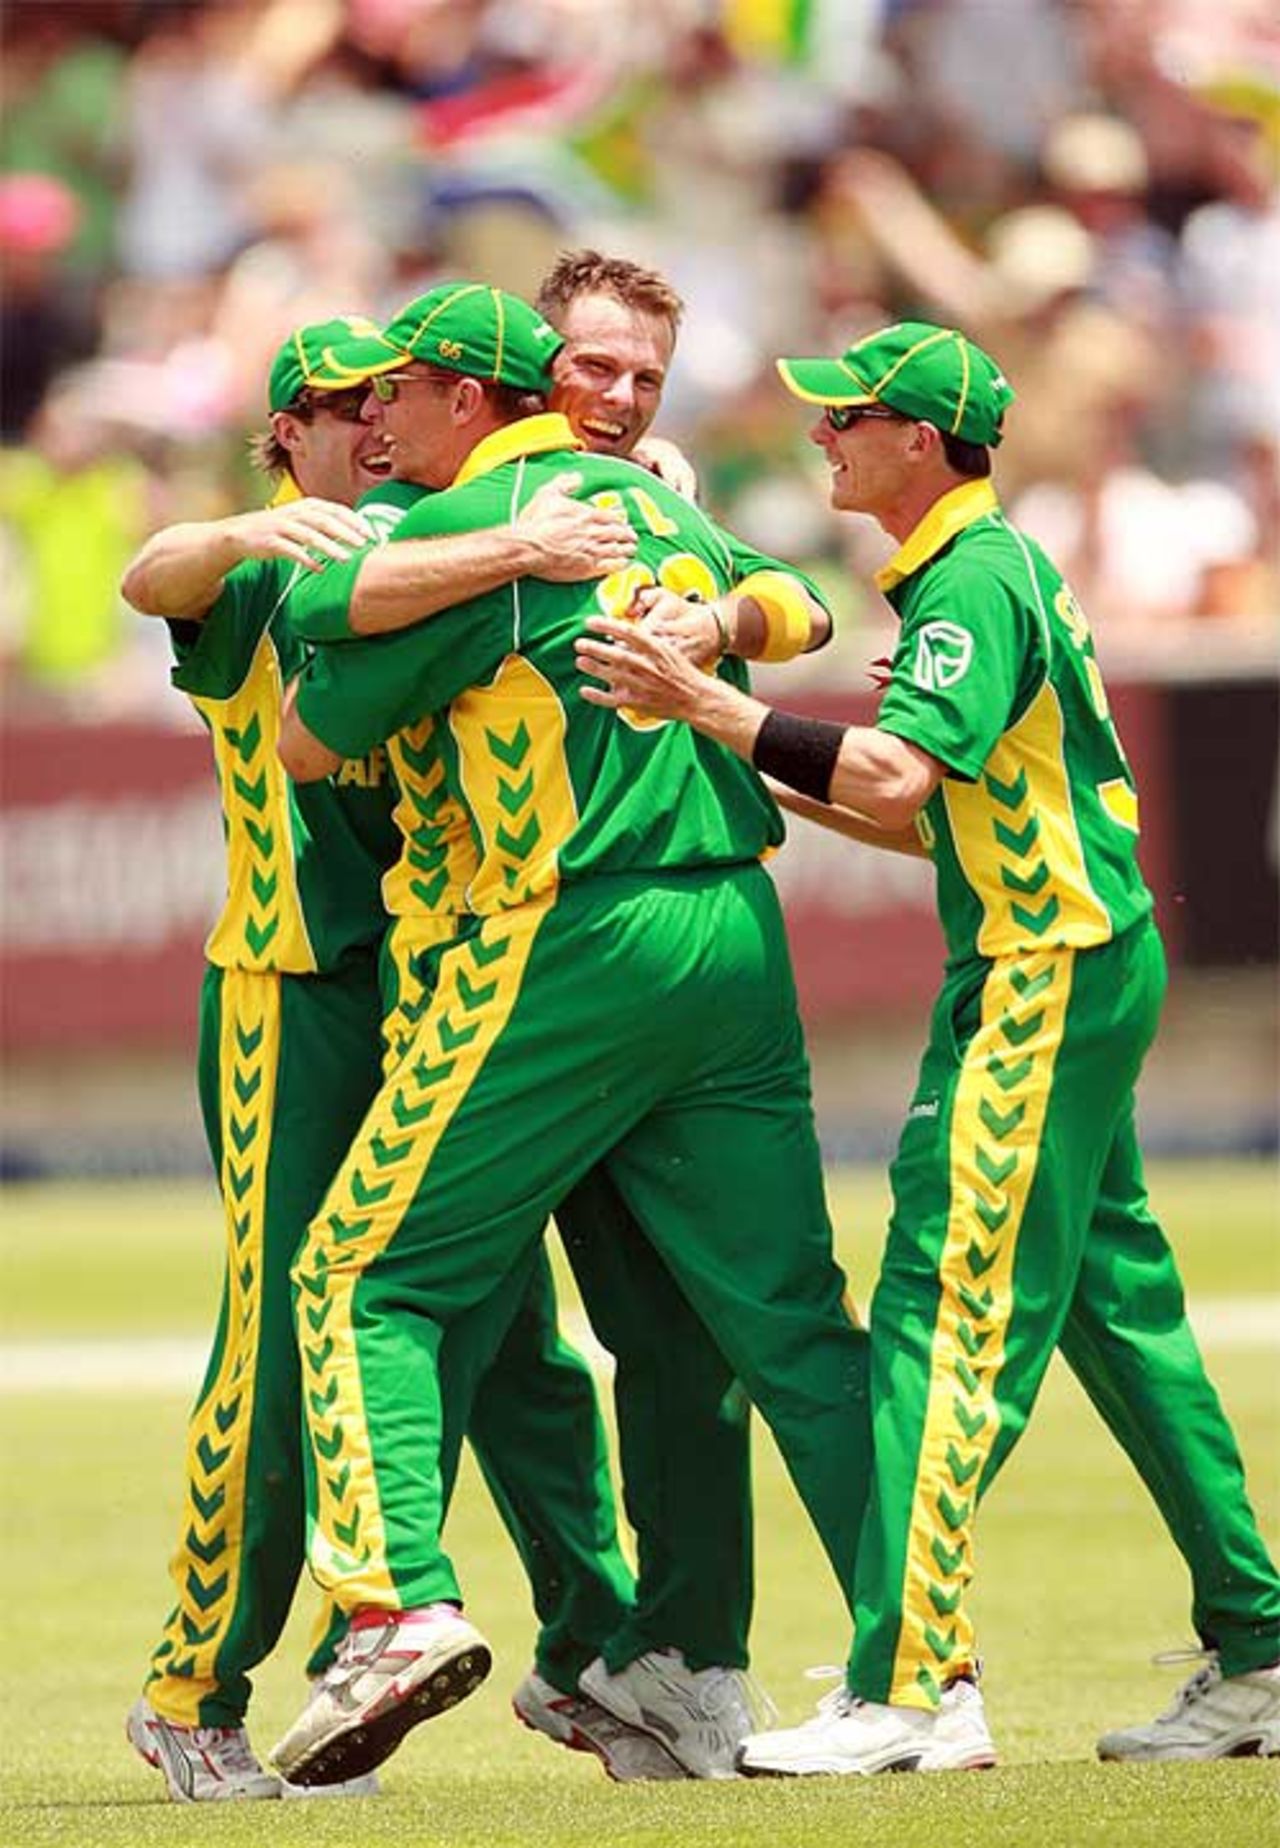 Johan Botha is congratulated by his team mates after picking up Scott Styris, South Africa v New Zealand, 3rd ODI, Cape Town, December 2, 2007